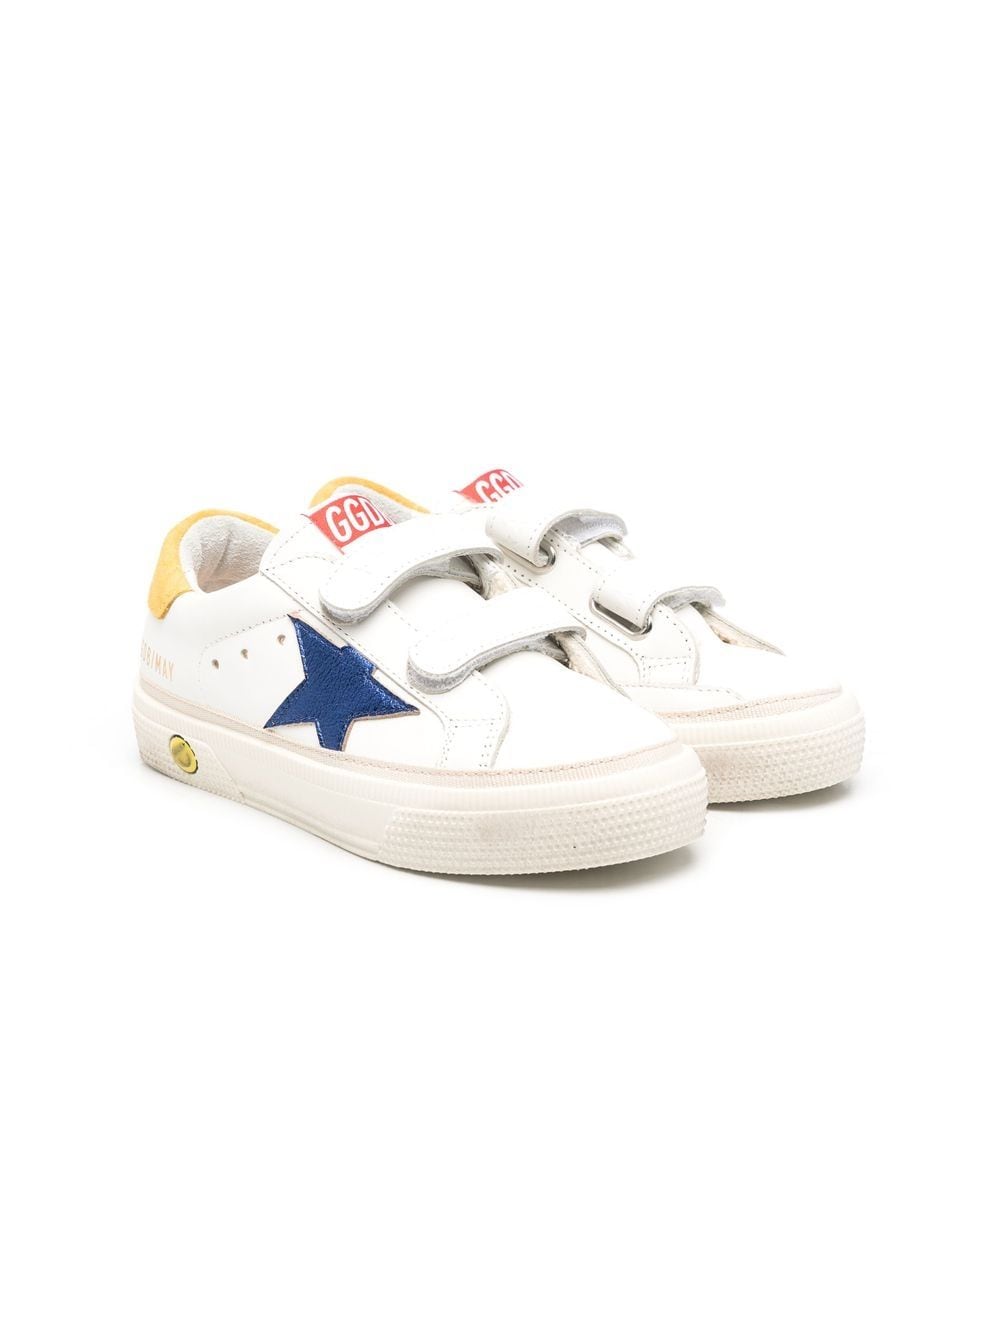 Golden Goose Kids May touch-strap low-top sneakers - White von Golden Goose Kids